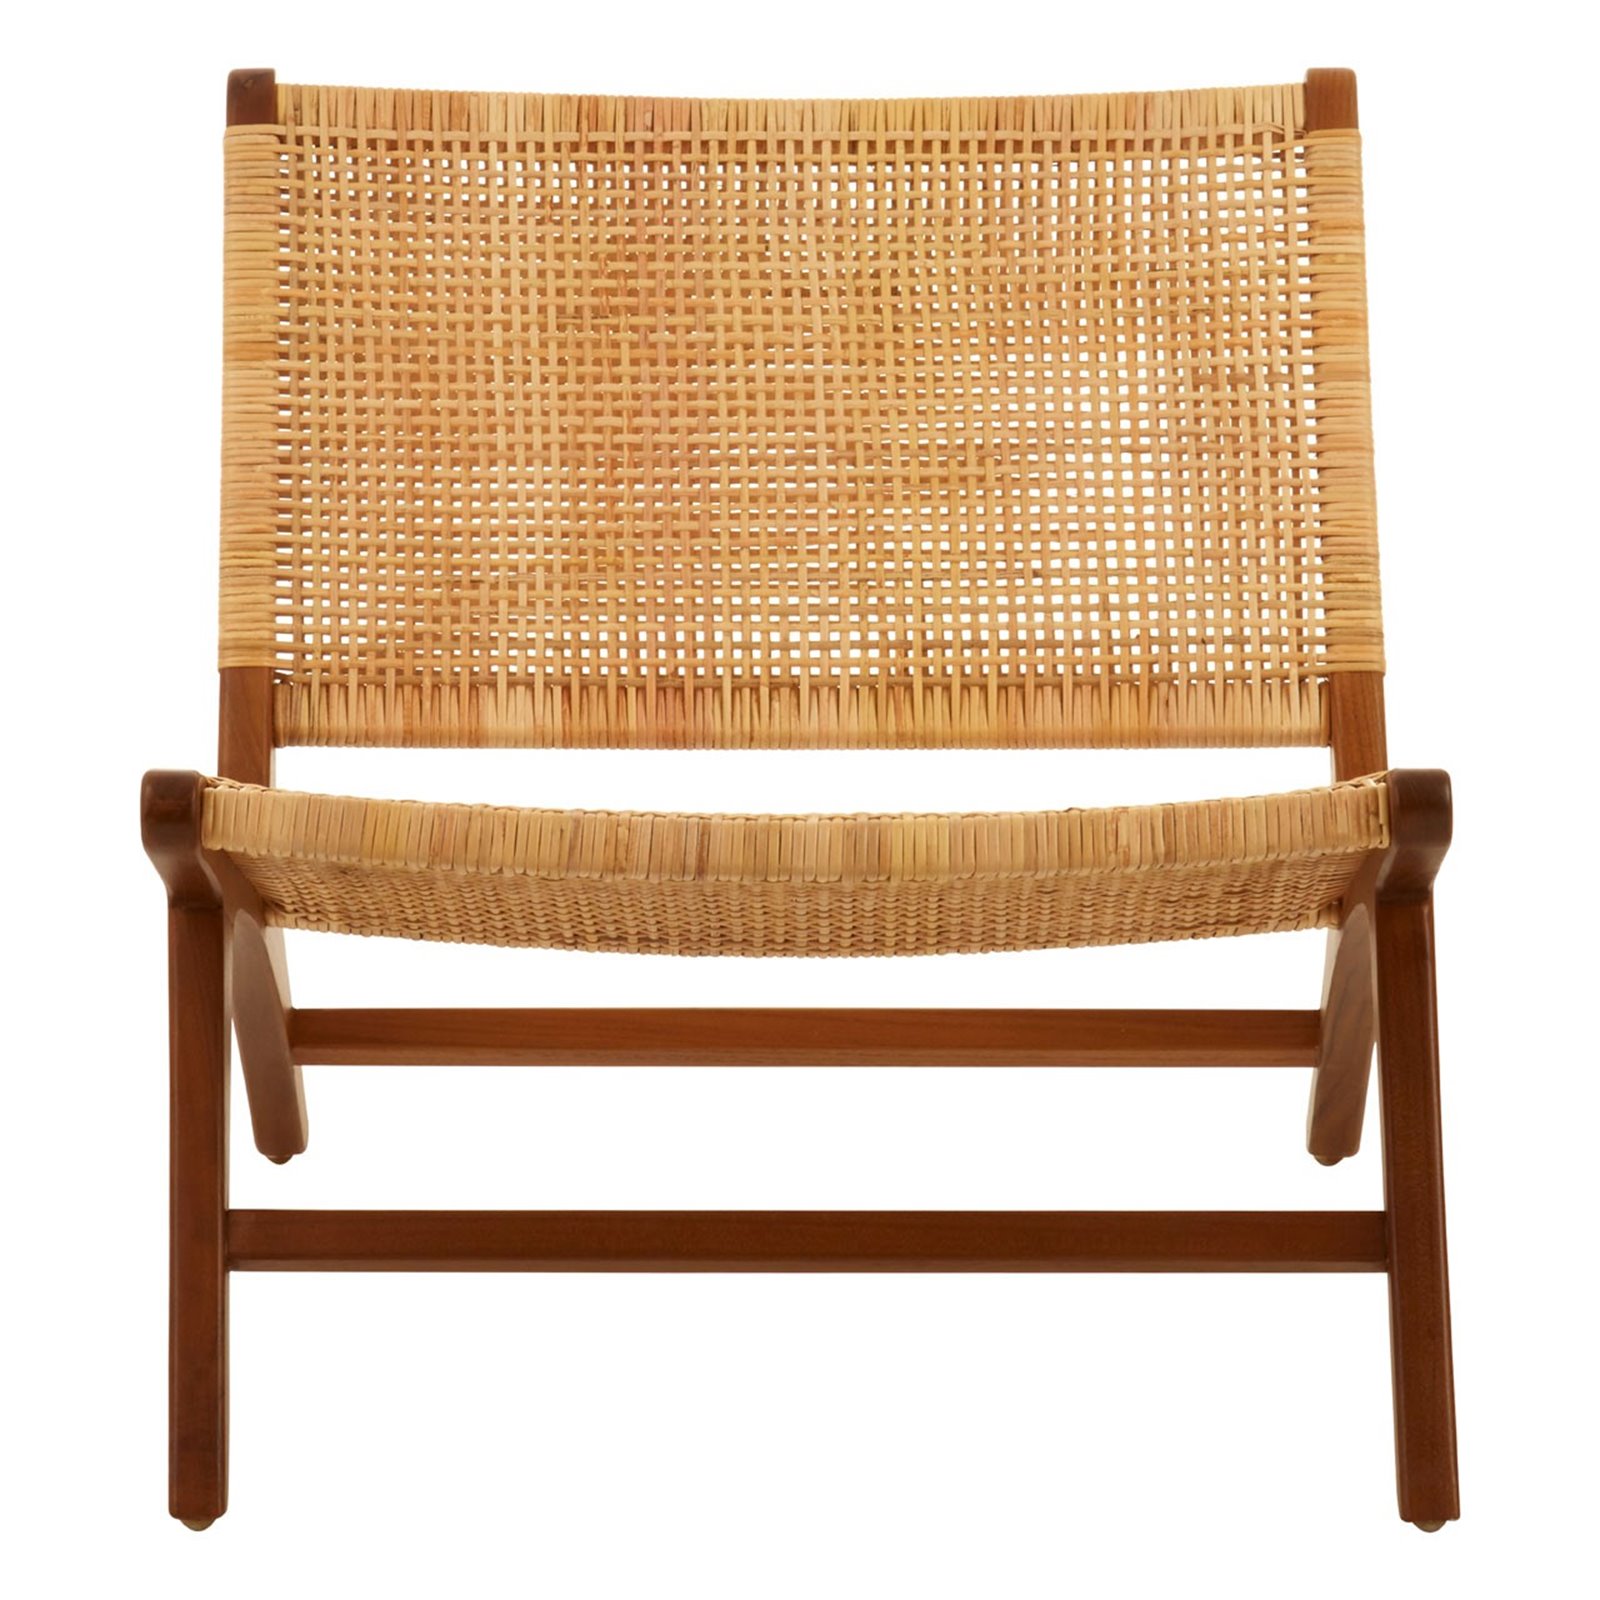 Teak and Rattan Outdoor Lounge Chair